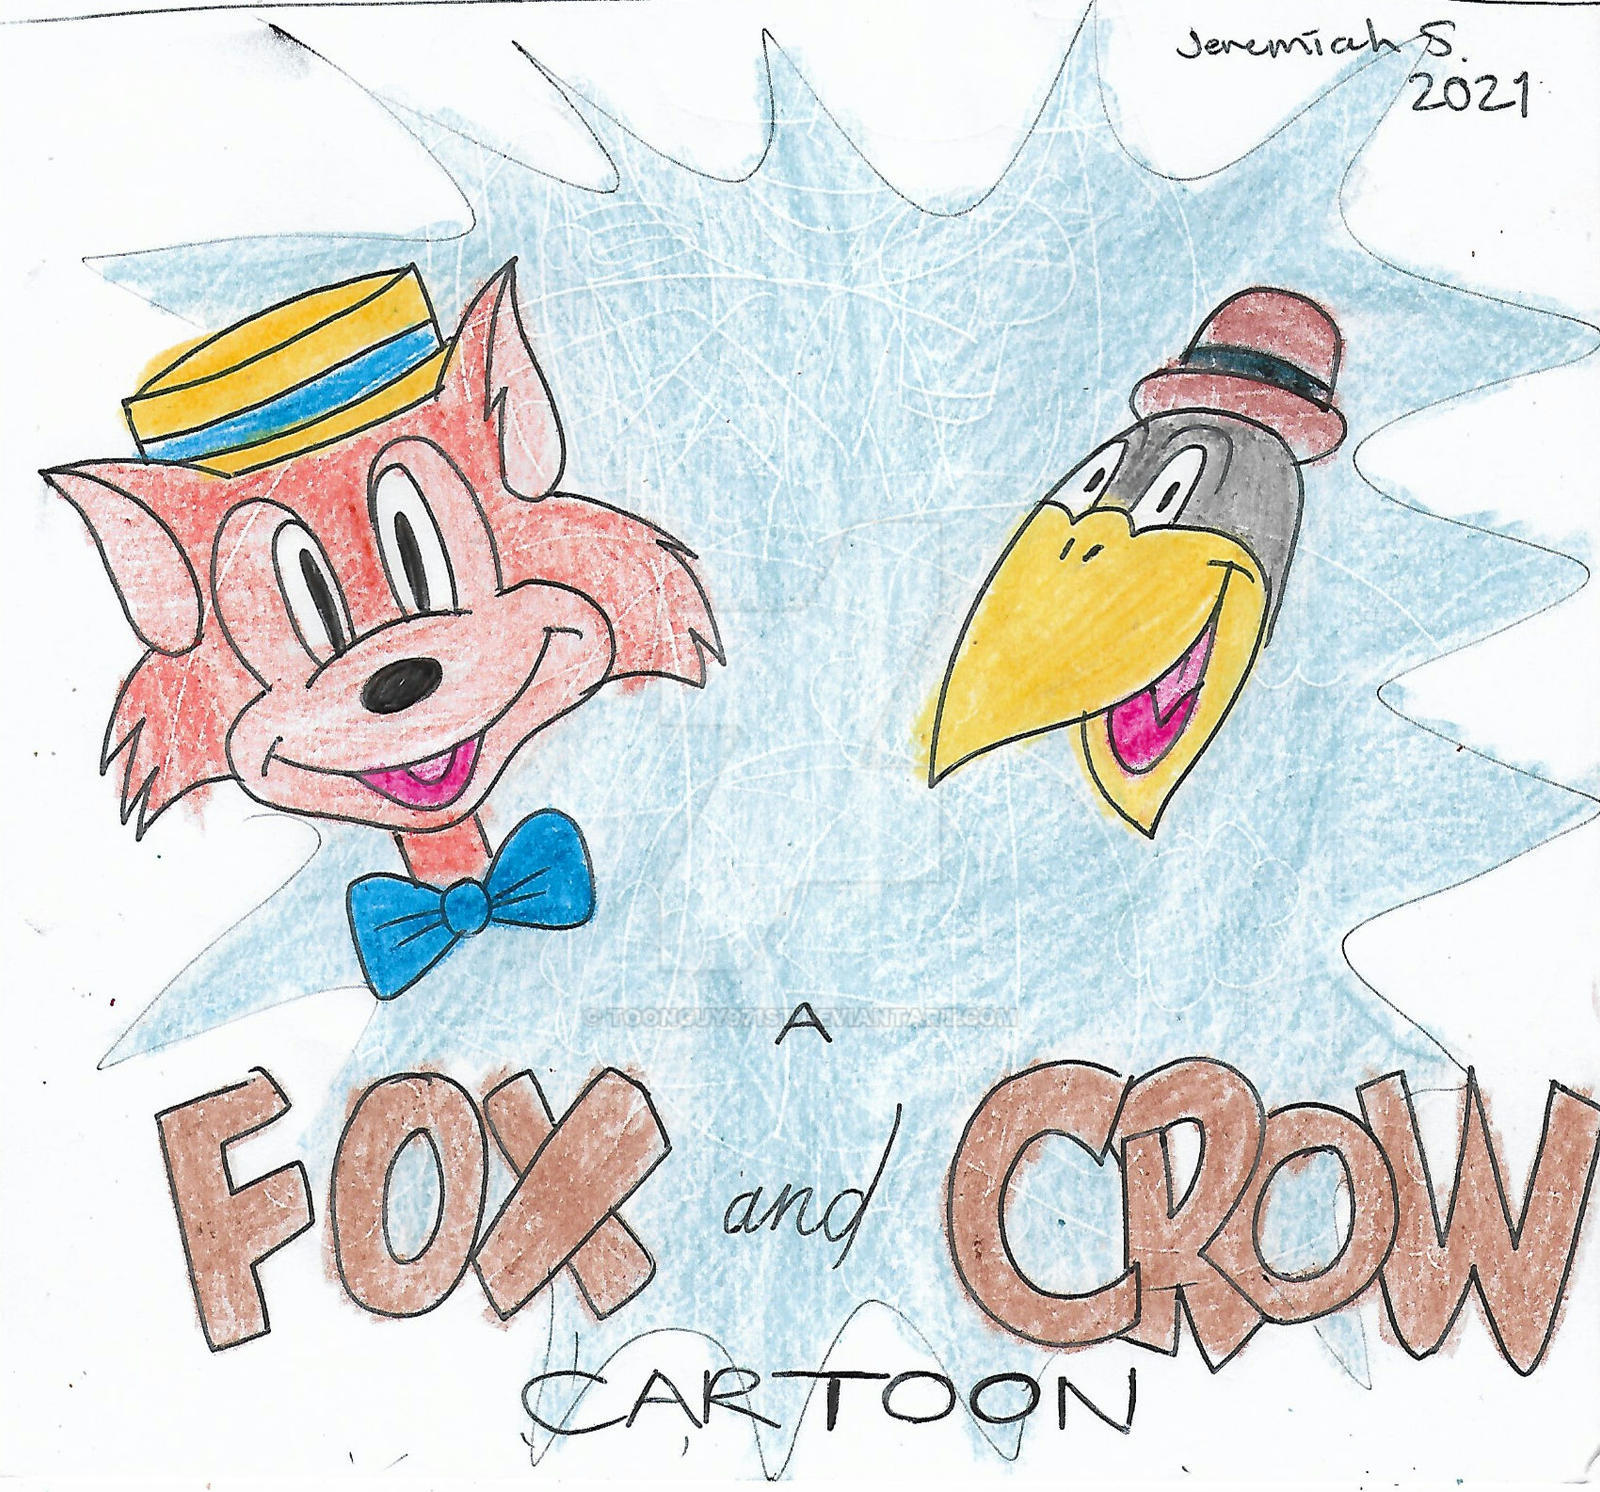 Fox and Crow - TITLE CARD by Toonguy971st on DeviantArt